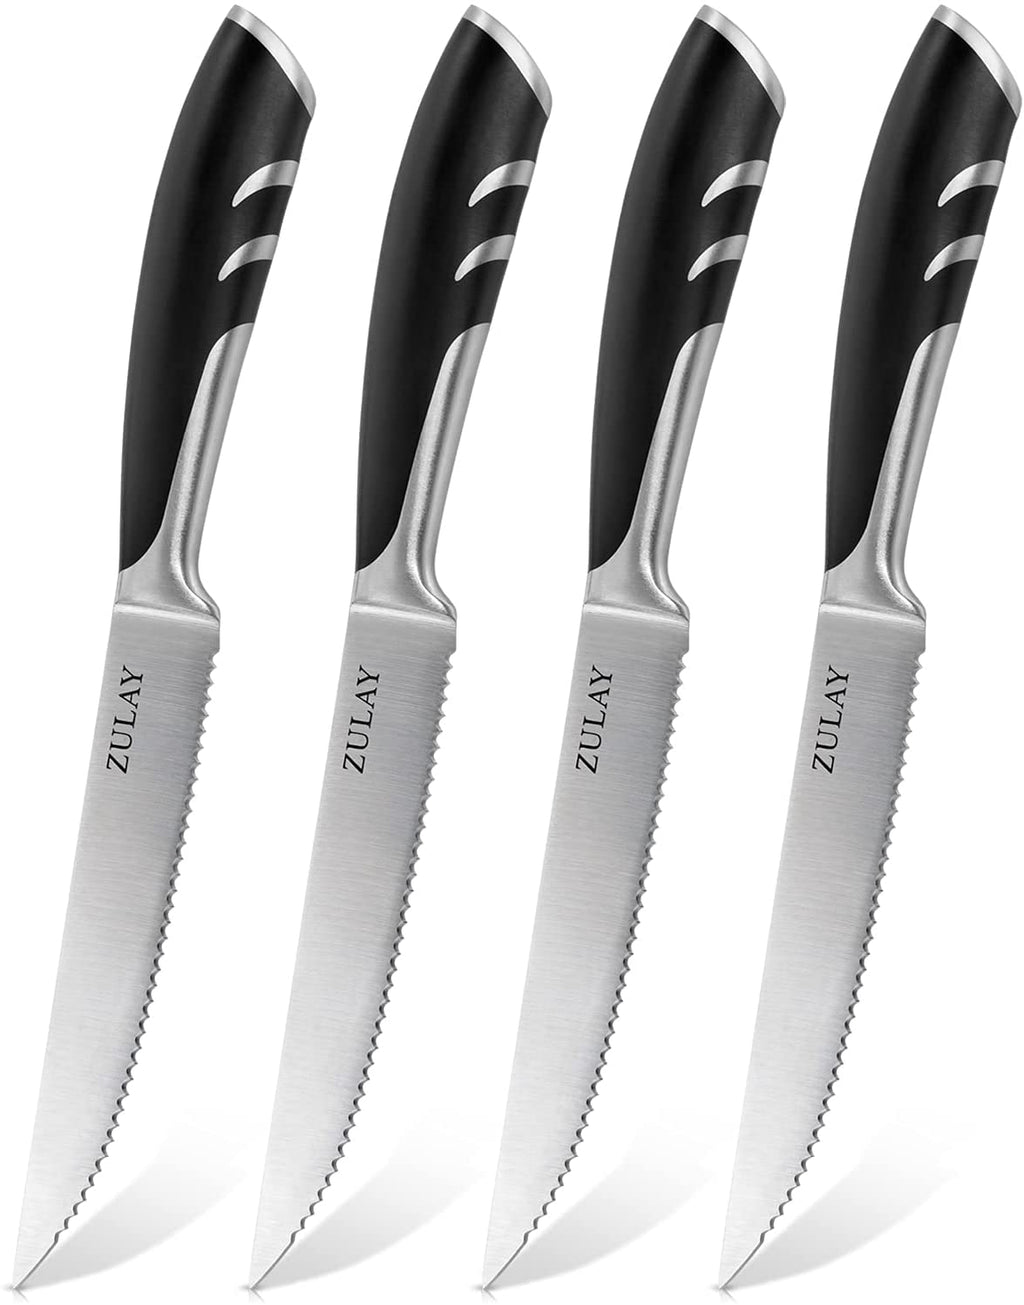 https://www.zulaykitchen.com/cdn/shop/products/steak-knives-set-of-4-5-inch-full-tang-serrated-stainless-steel-steak-knife-set-with-comfortable-non-slip-handlesteak-knives-set-of-4-5-inch-full-tang-serrated--112384.jpg?v=1684848753&width=1024